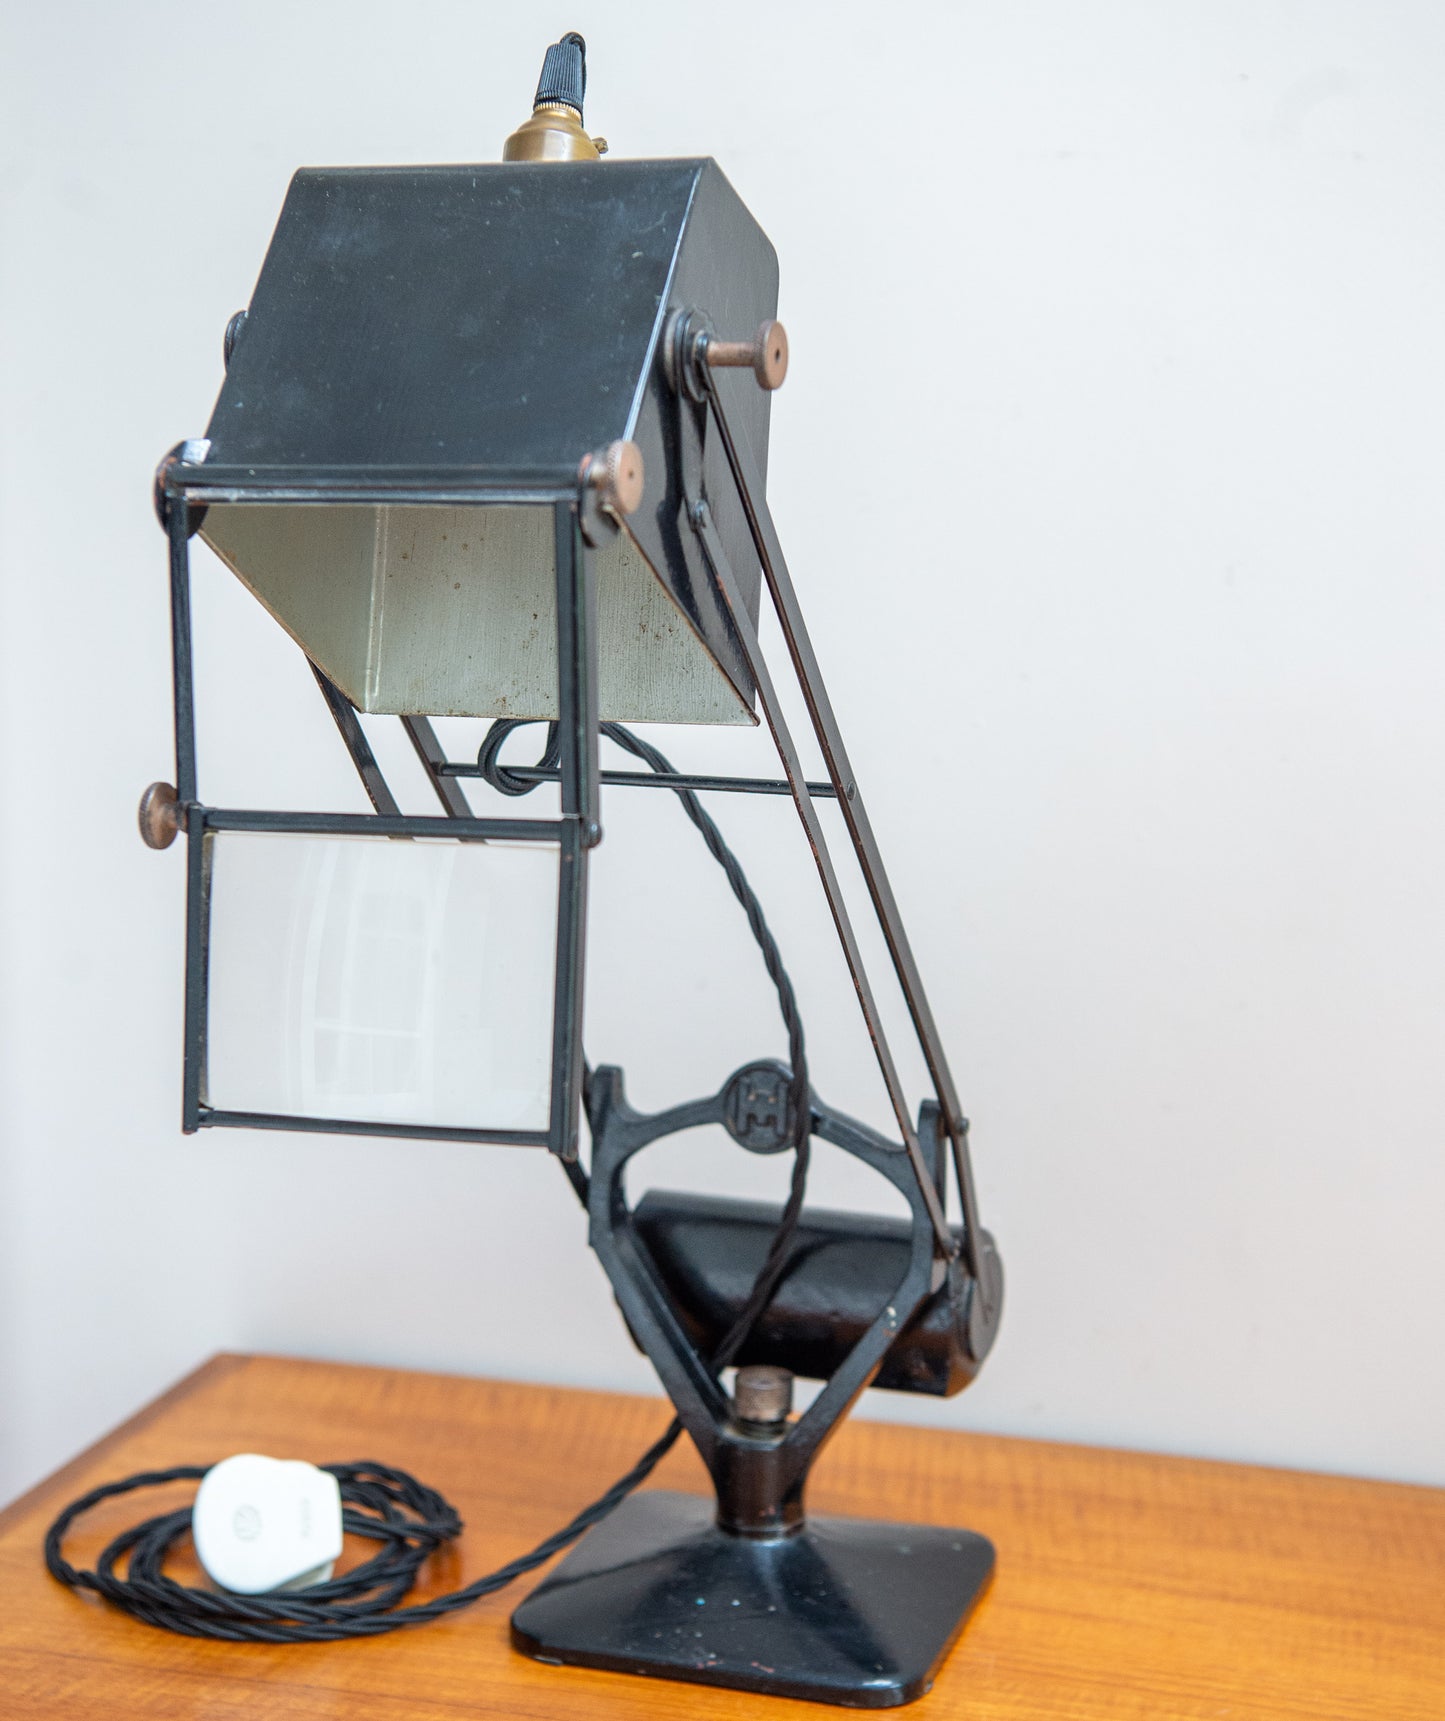 Early Hadrill & Horstmann ‘Pluslite' Table Lamp With Magnifying Glass Designed For Map Reading. English 1940s